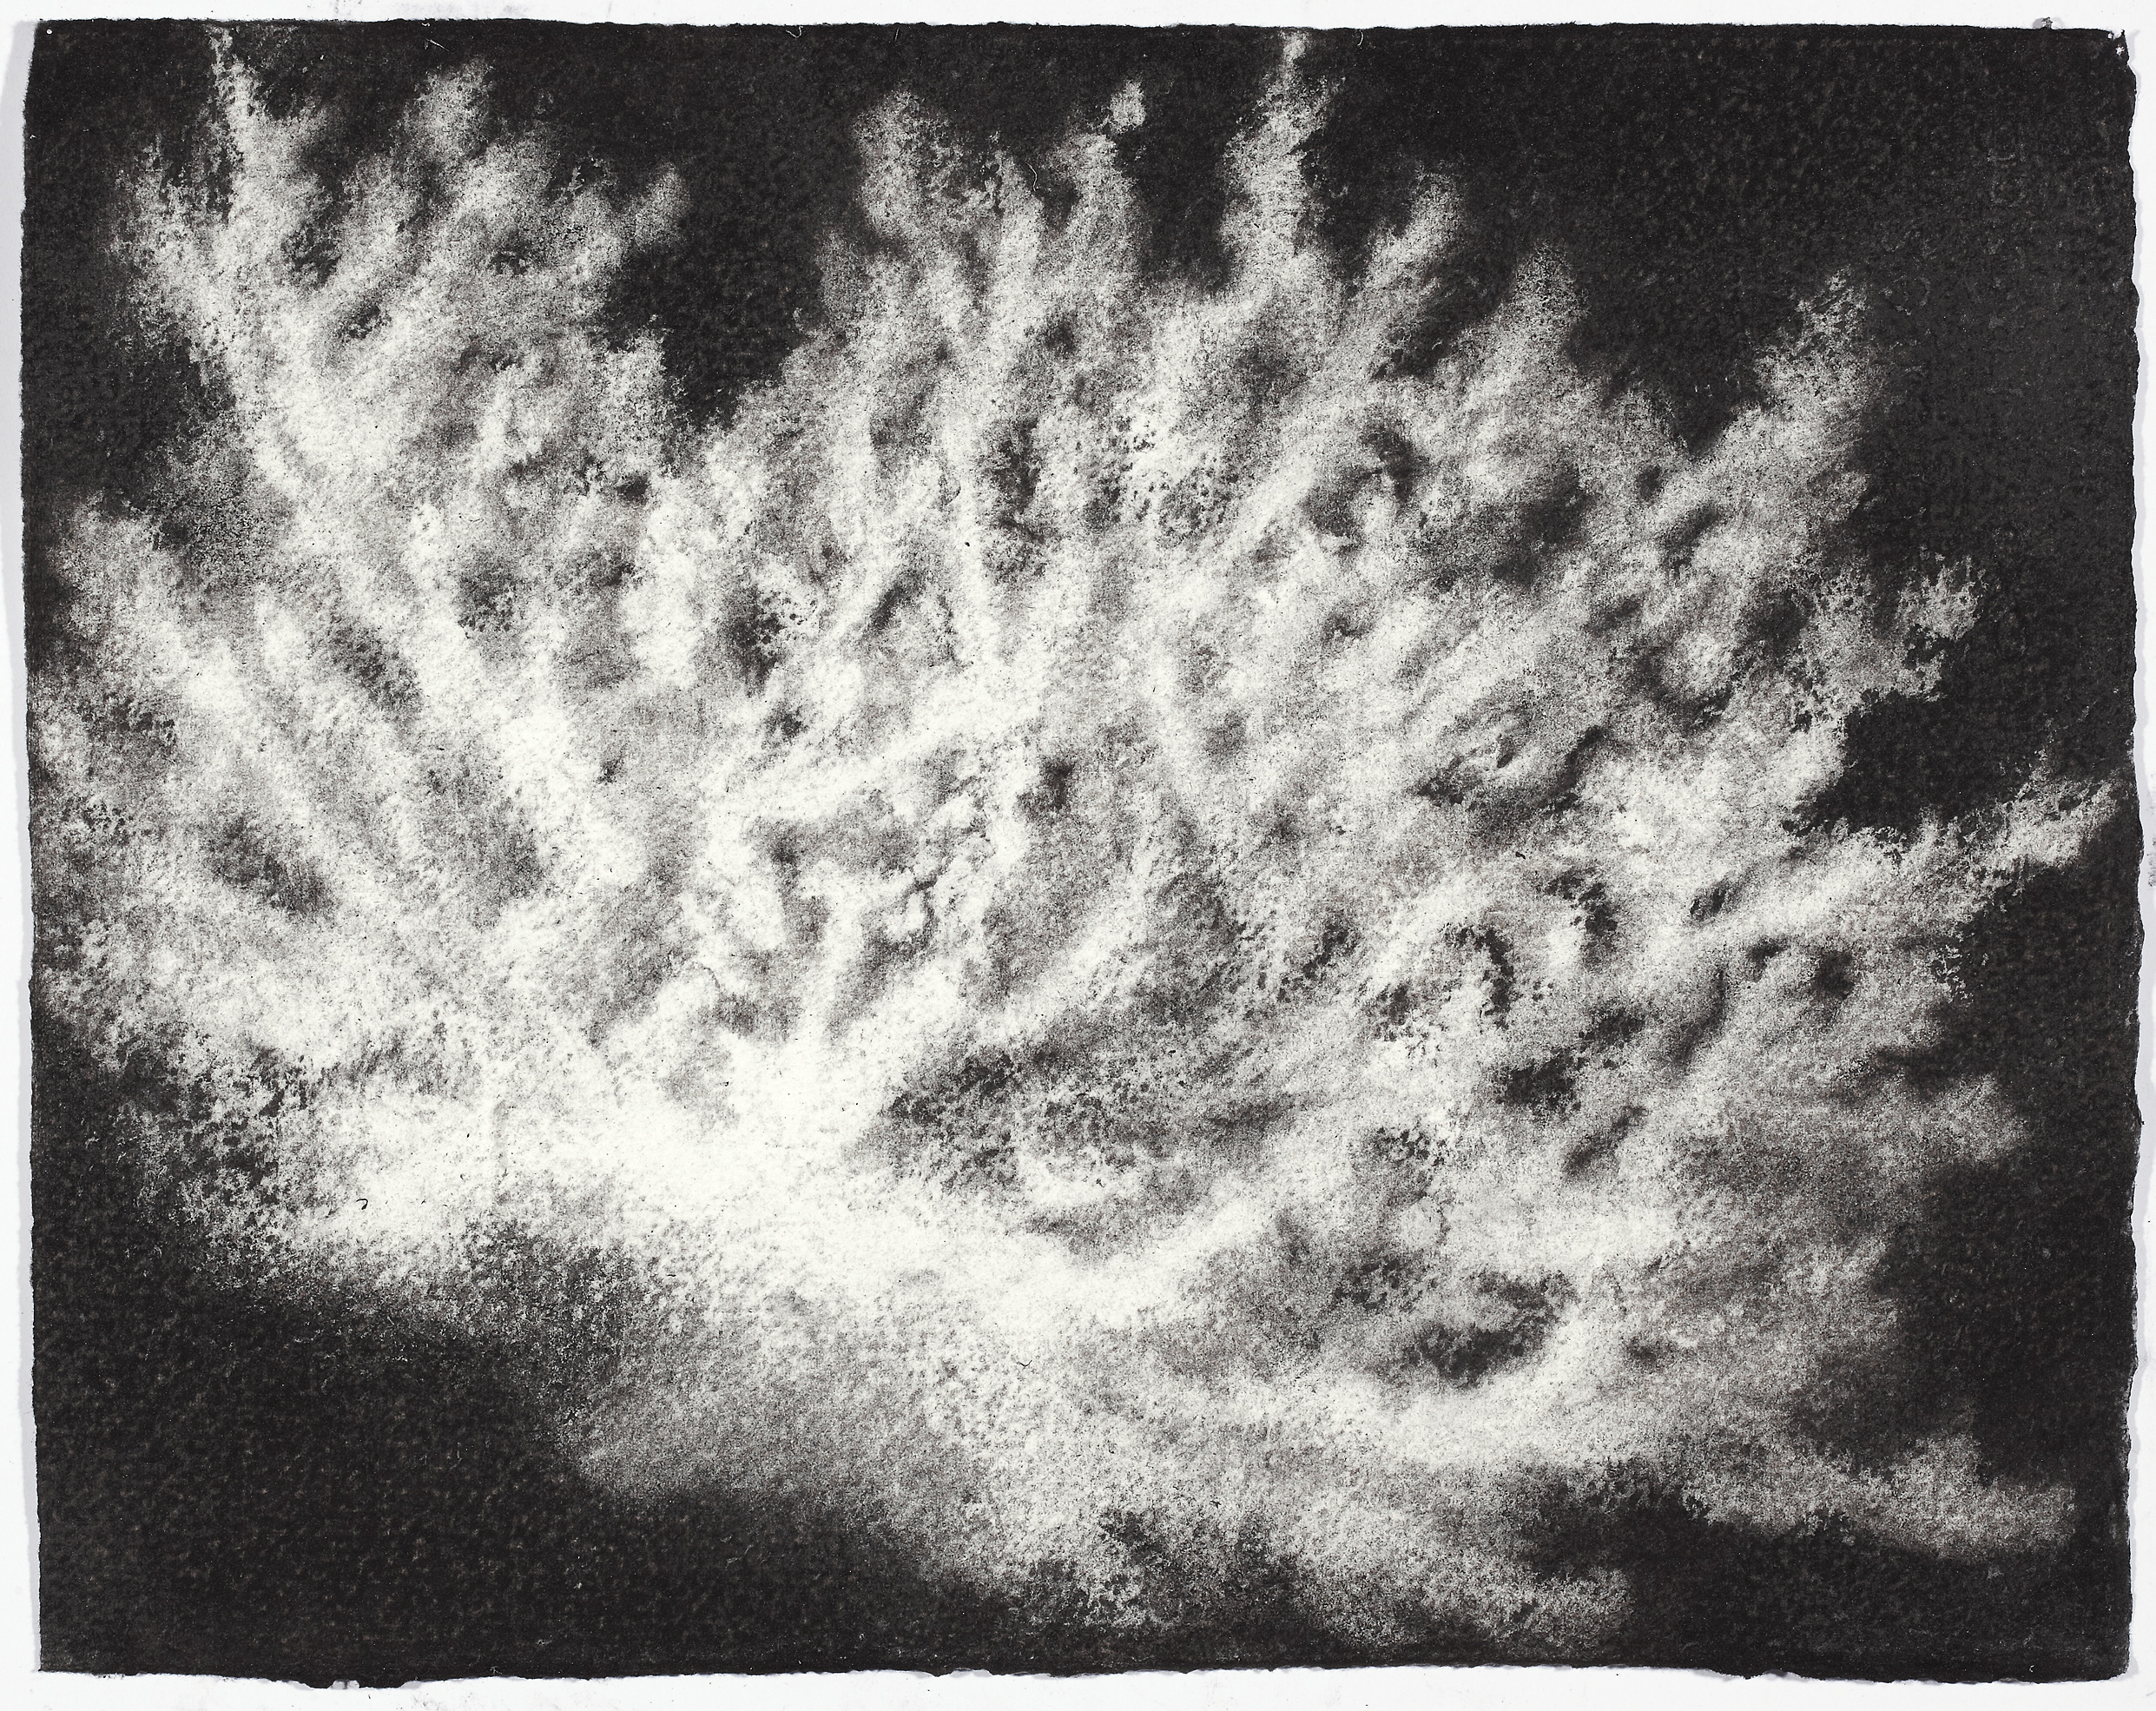  charcoal on paper, 26.5 x 33cm,&nbsp;collection The Art Gallery of New South Wales 